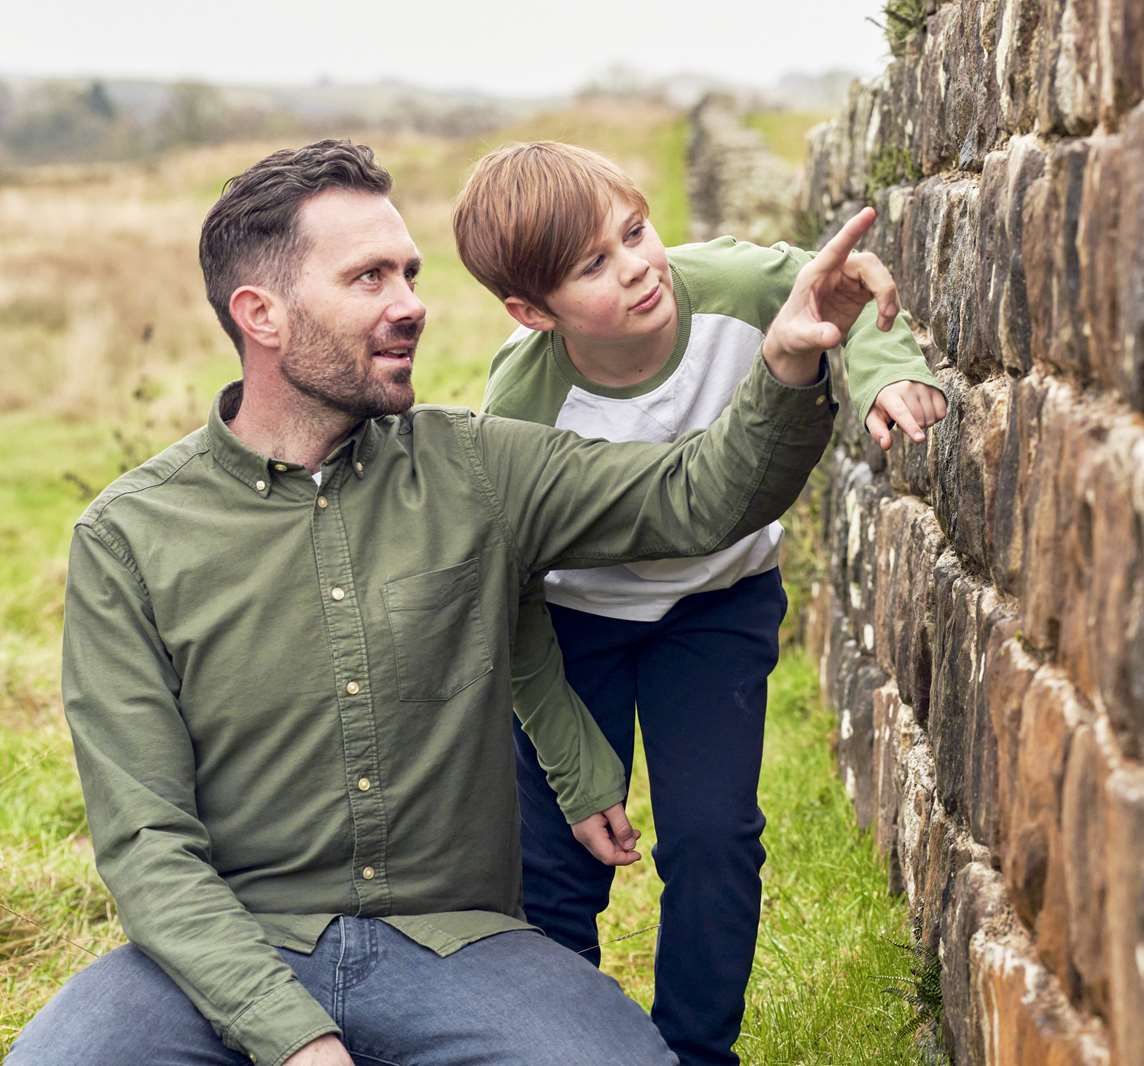 Image: A parent and child examine Hadrian's Wall